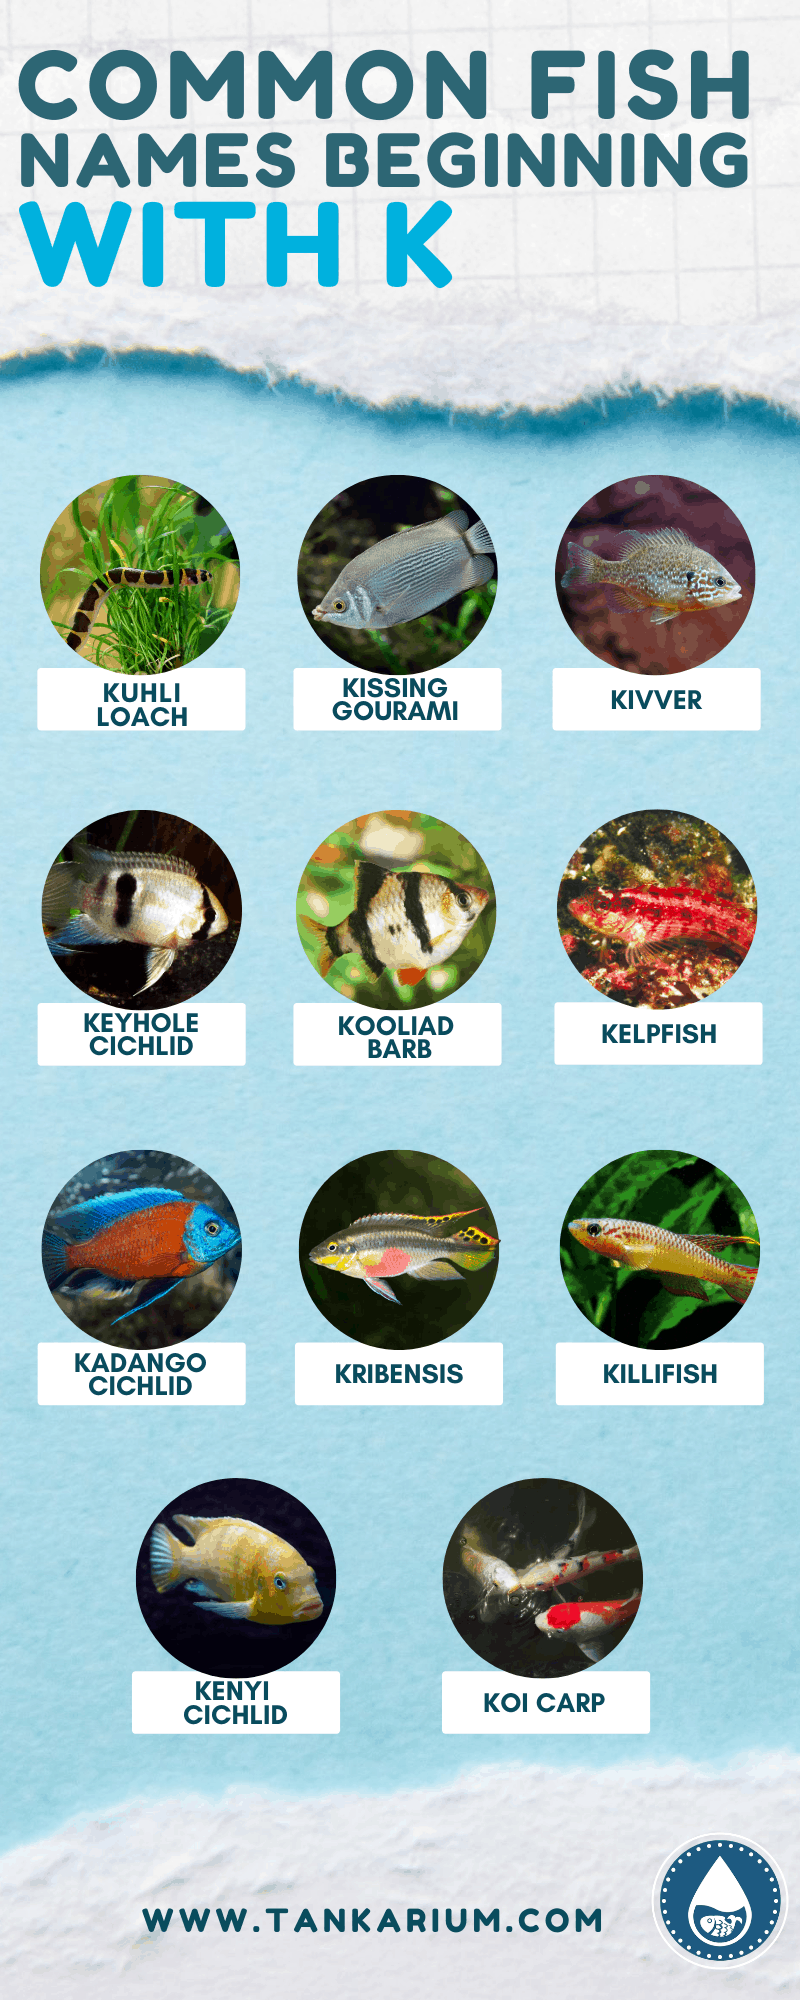 Common Fish Names Beginning With K - Infographic